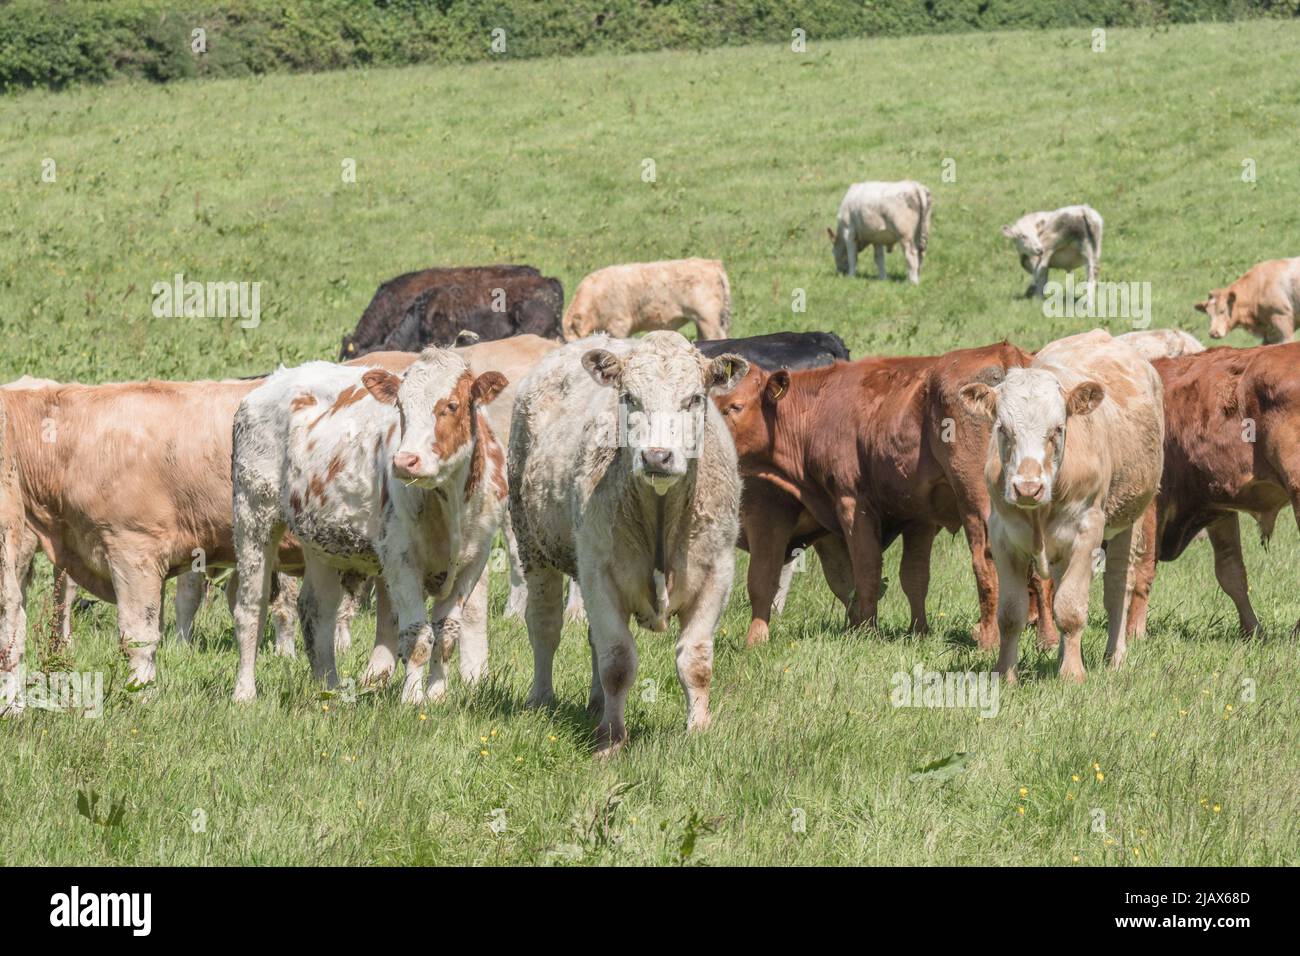 Small group of young bullocks in field & looking inquisitively at camera. For UK livestock industry, British beef, UK farming, UK farm animal welfare. Stock Photo